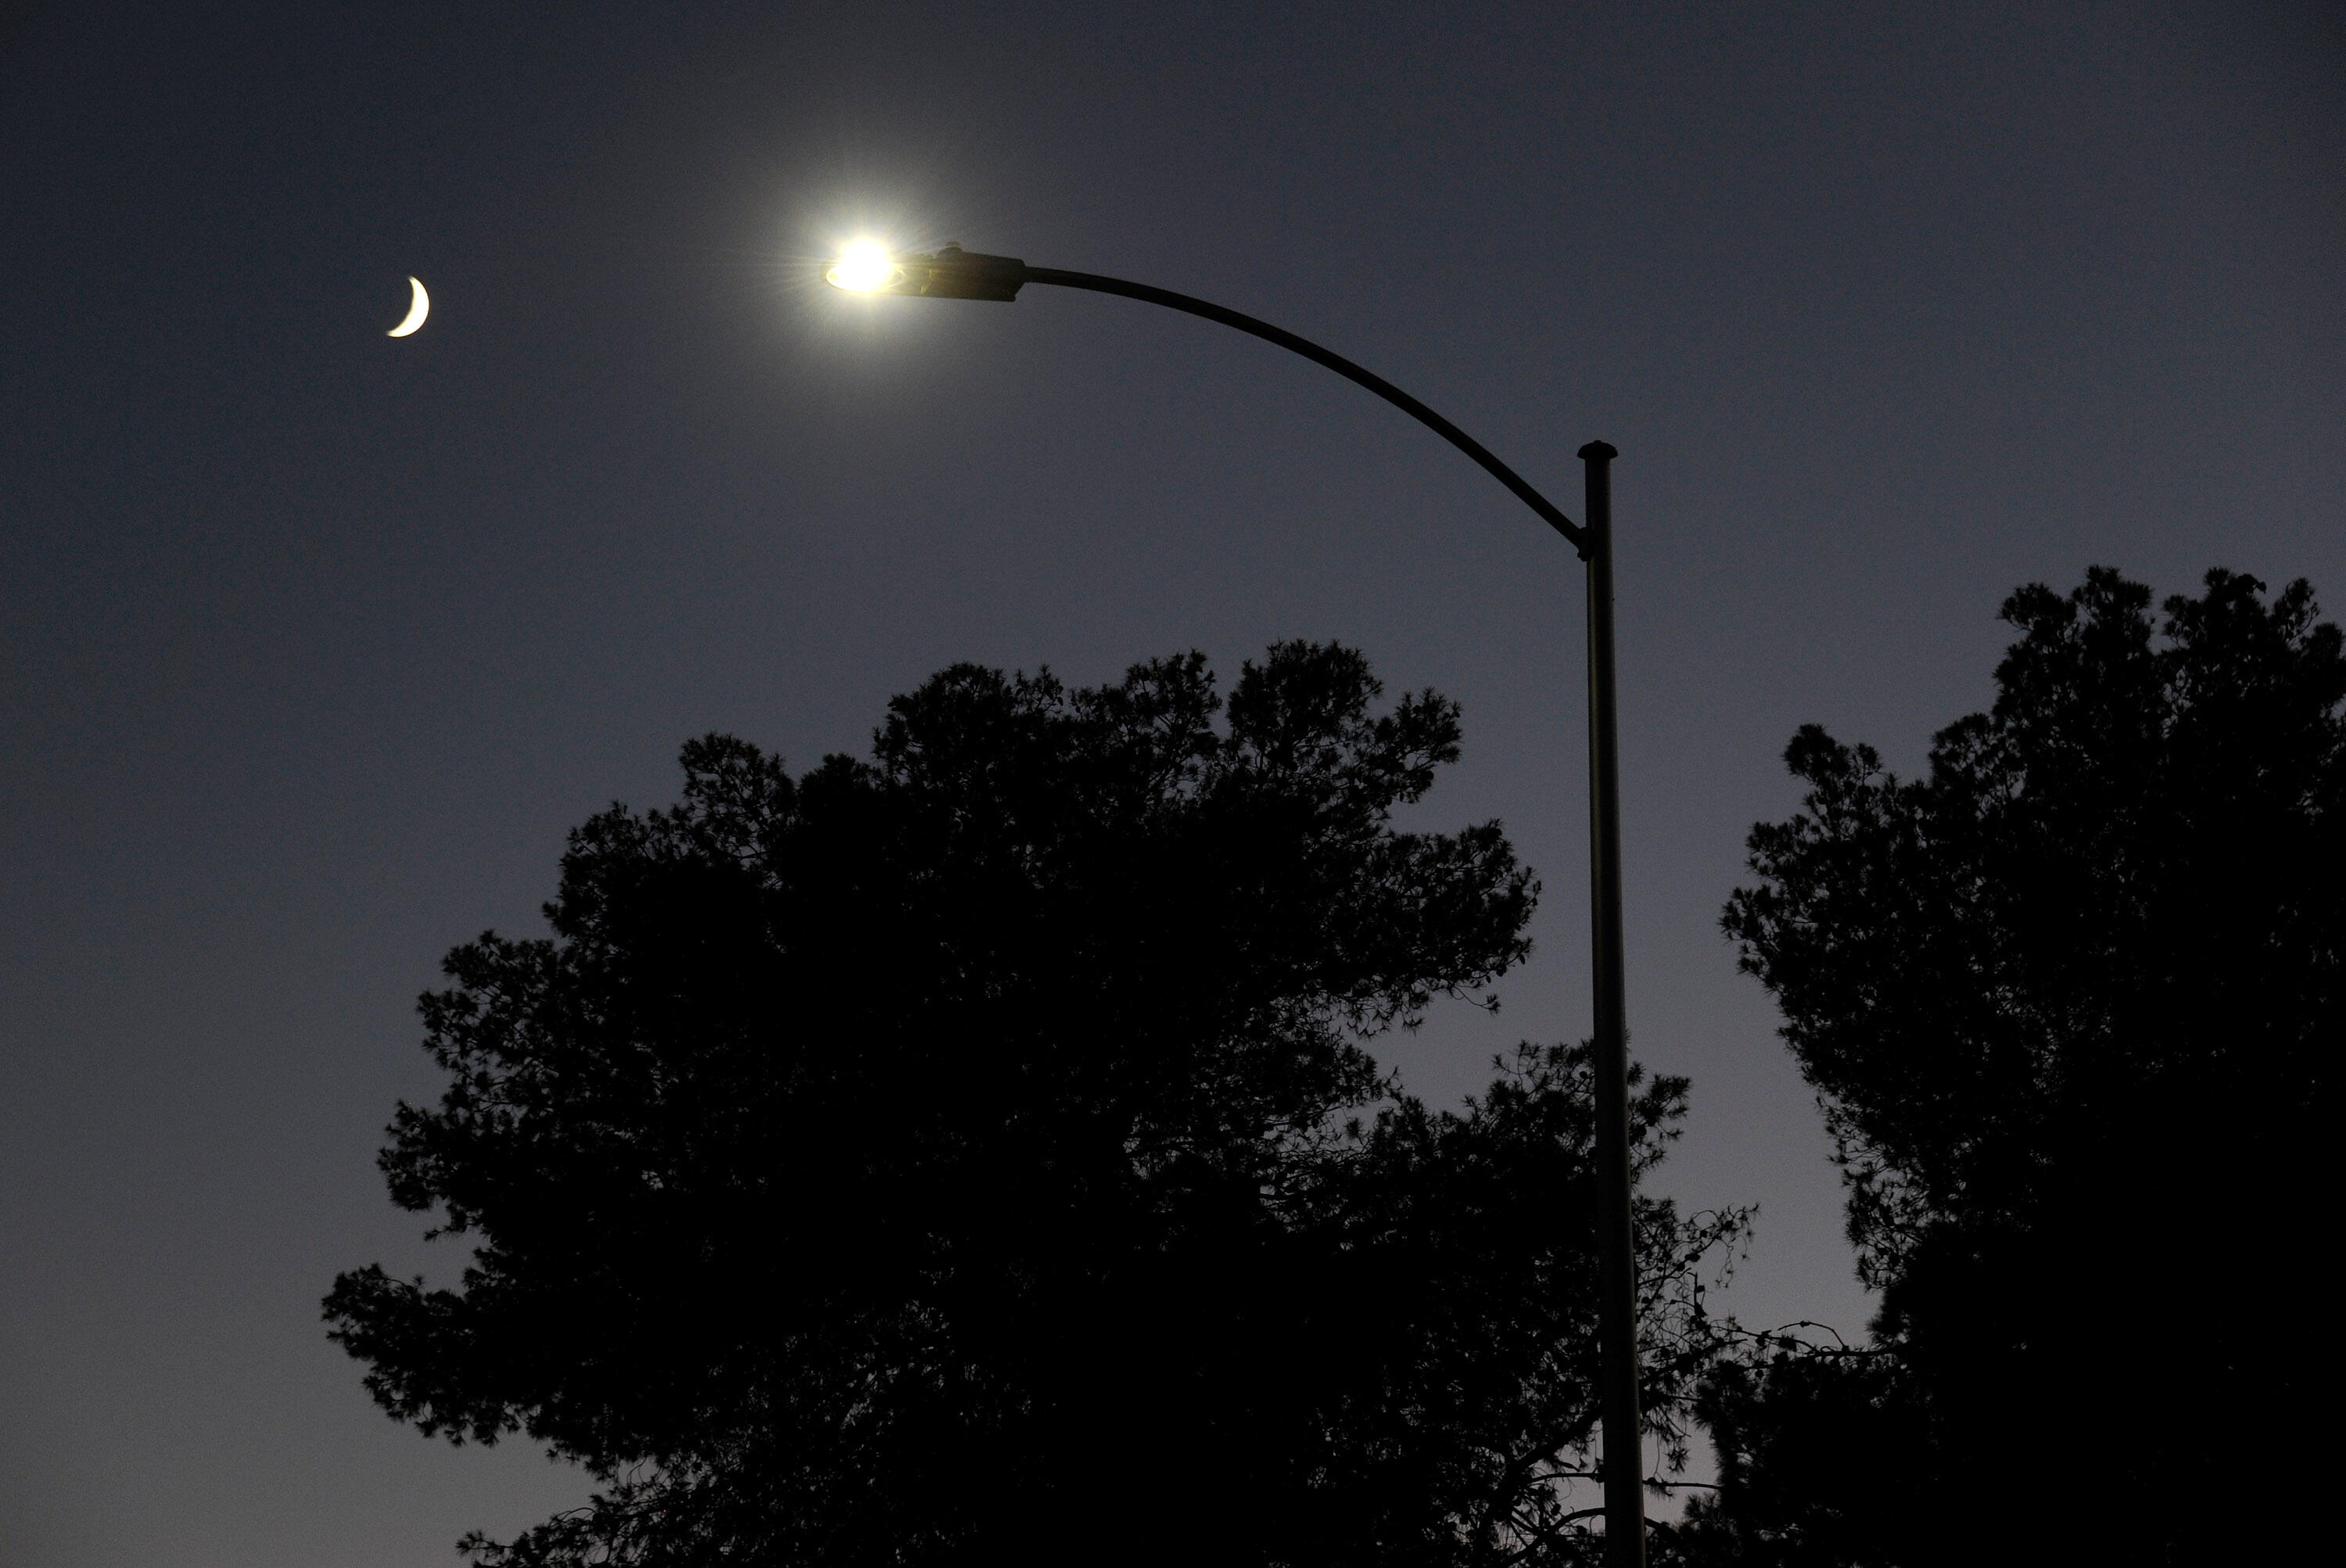 LAS VEGAS, NV - AUGUST 03:  A waxing crescent moon is seen behind a streetlight with a newly-installed LED fixture August 3, 2011 in Las Vegas, Nevada. The city is replacing 6,600 existing lights with the new energy-efficient LEDs, which are expected to reduce the city's annual electricity use by eight million kilowatt hours, saving about USD 400,000. The city estimates the LEDs will last about 15 years, nine years longer than the current lights. Funding for the project comes from federal energy conservation bonds and an American Recovery & Reinvestment Act grant. The city plans to replace all of its 50,000 streetlights after more funding is secured.  (Photo by Ethan Miller/Getty Images)